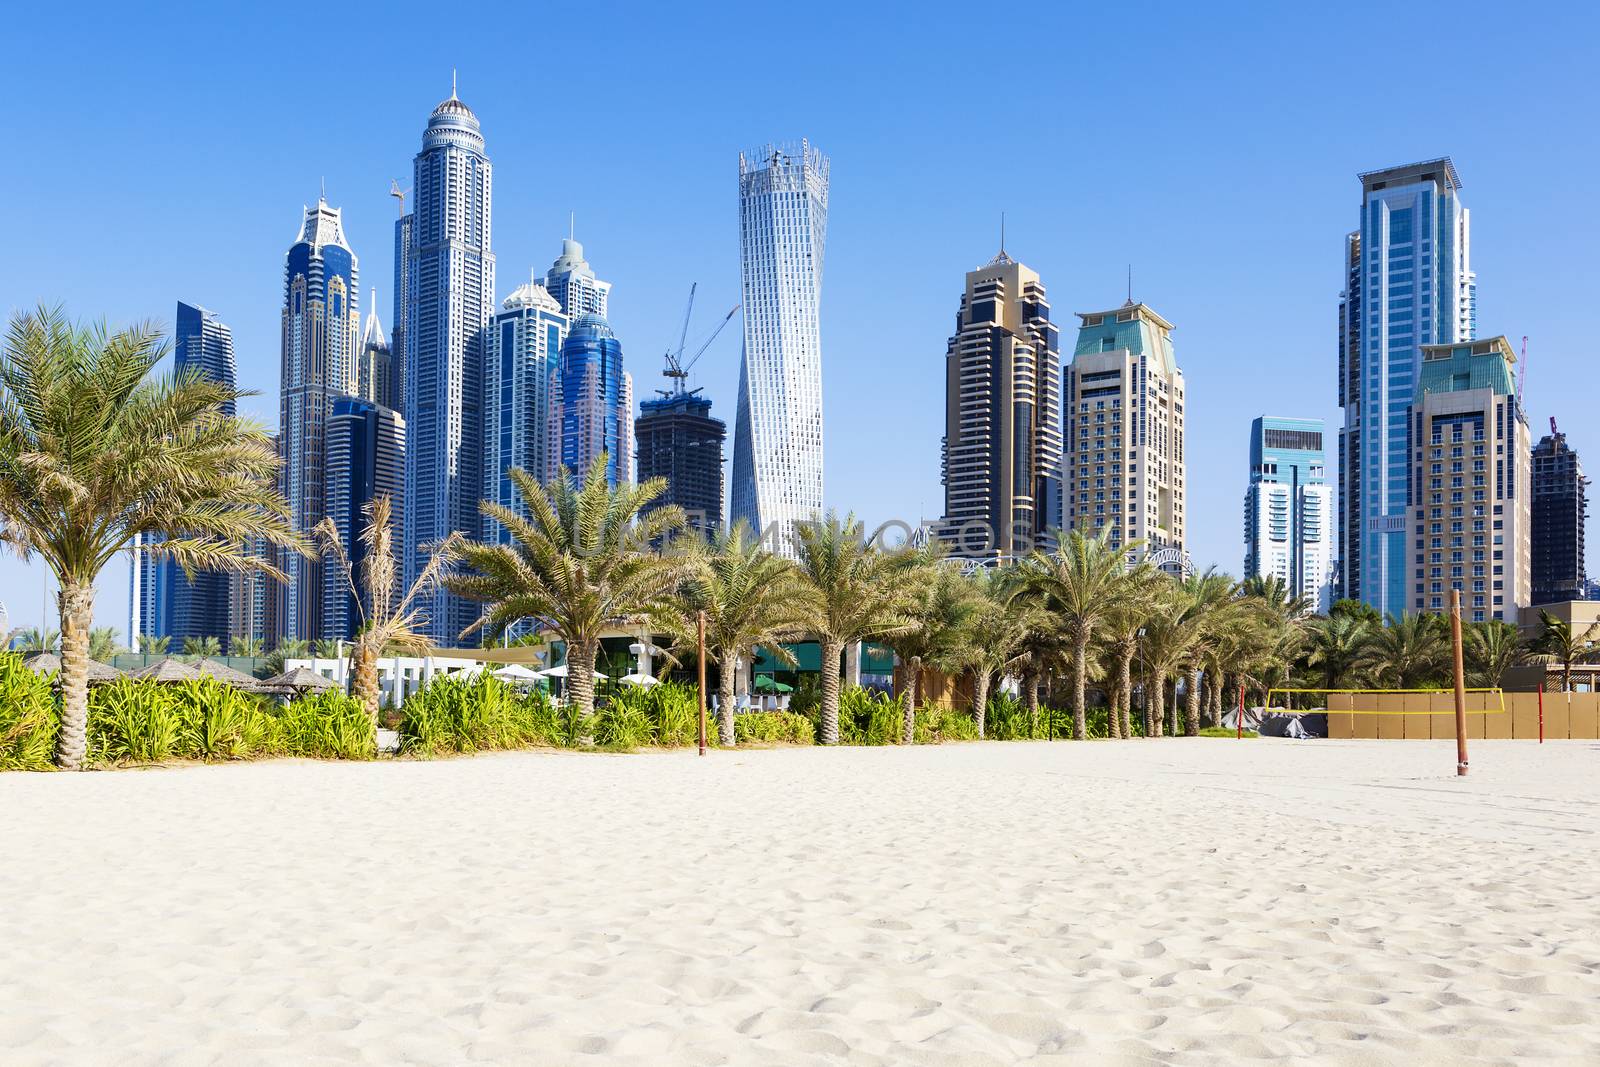 Horizontal view of skyscrapers and jumeirah beach by vwalakte